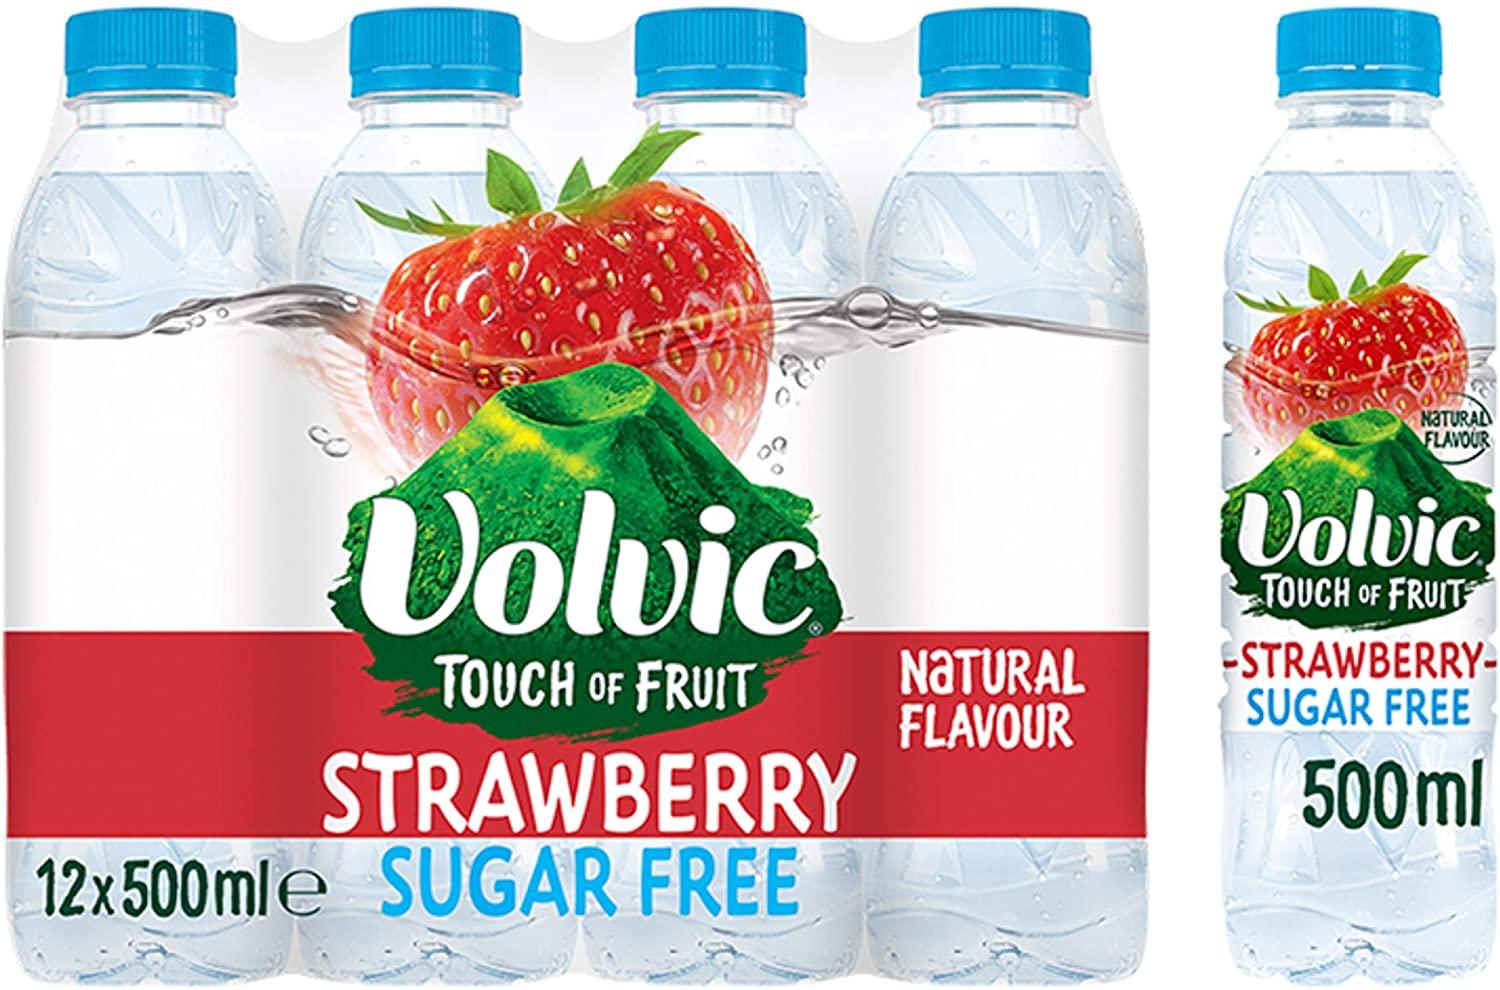 Volvic Touch of Fruit Sugar Free Strawberry Flavoured Water, 12 x 500 ml - Vending Superstore